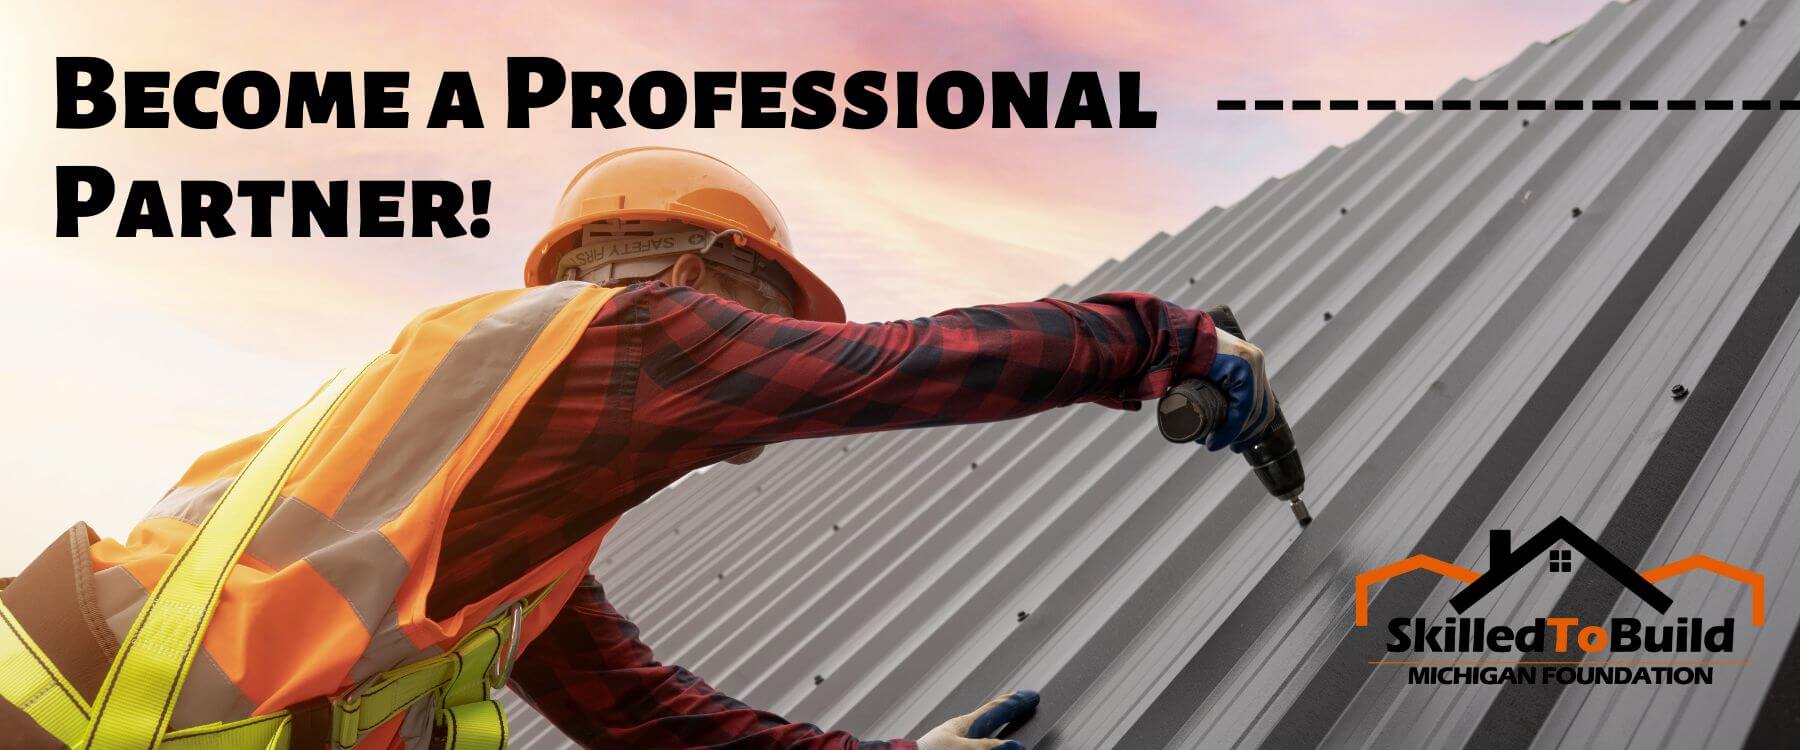 Professional Partners Banner